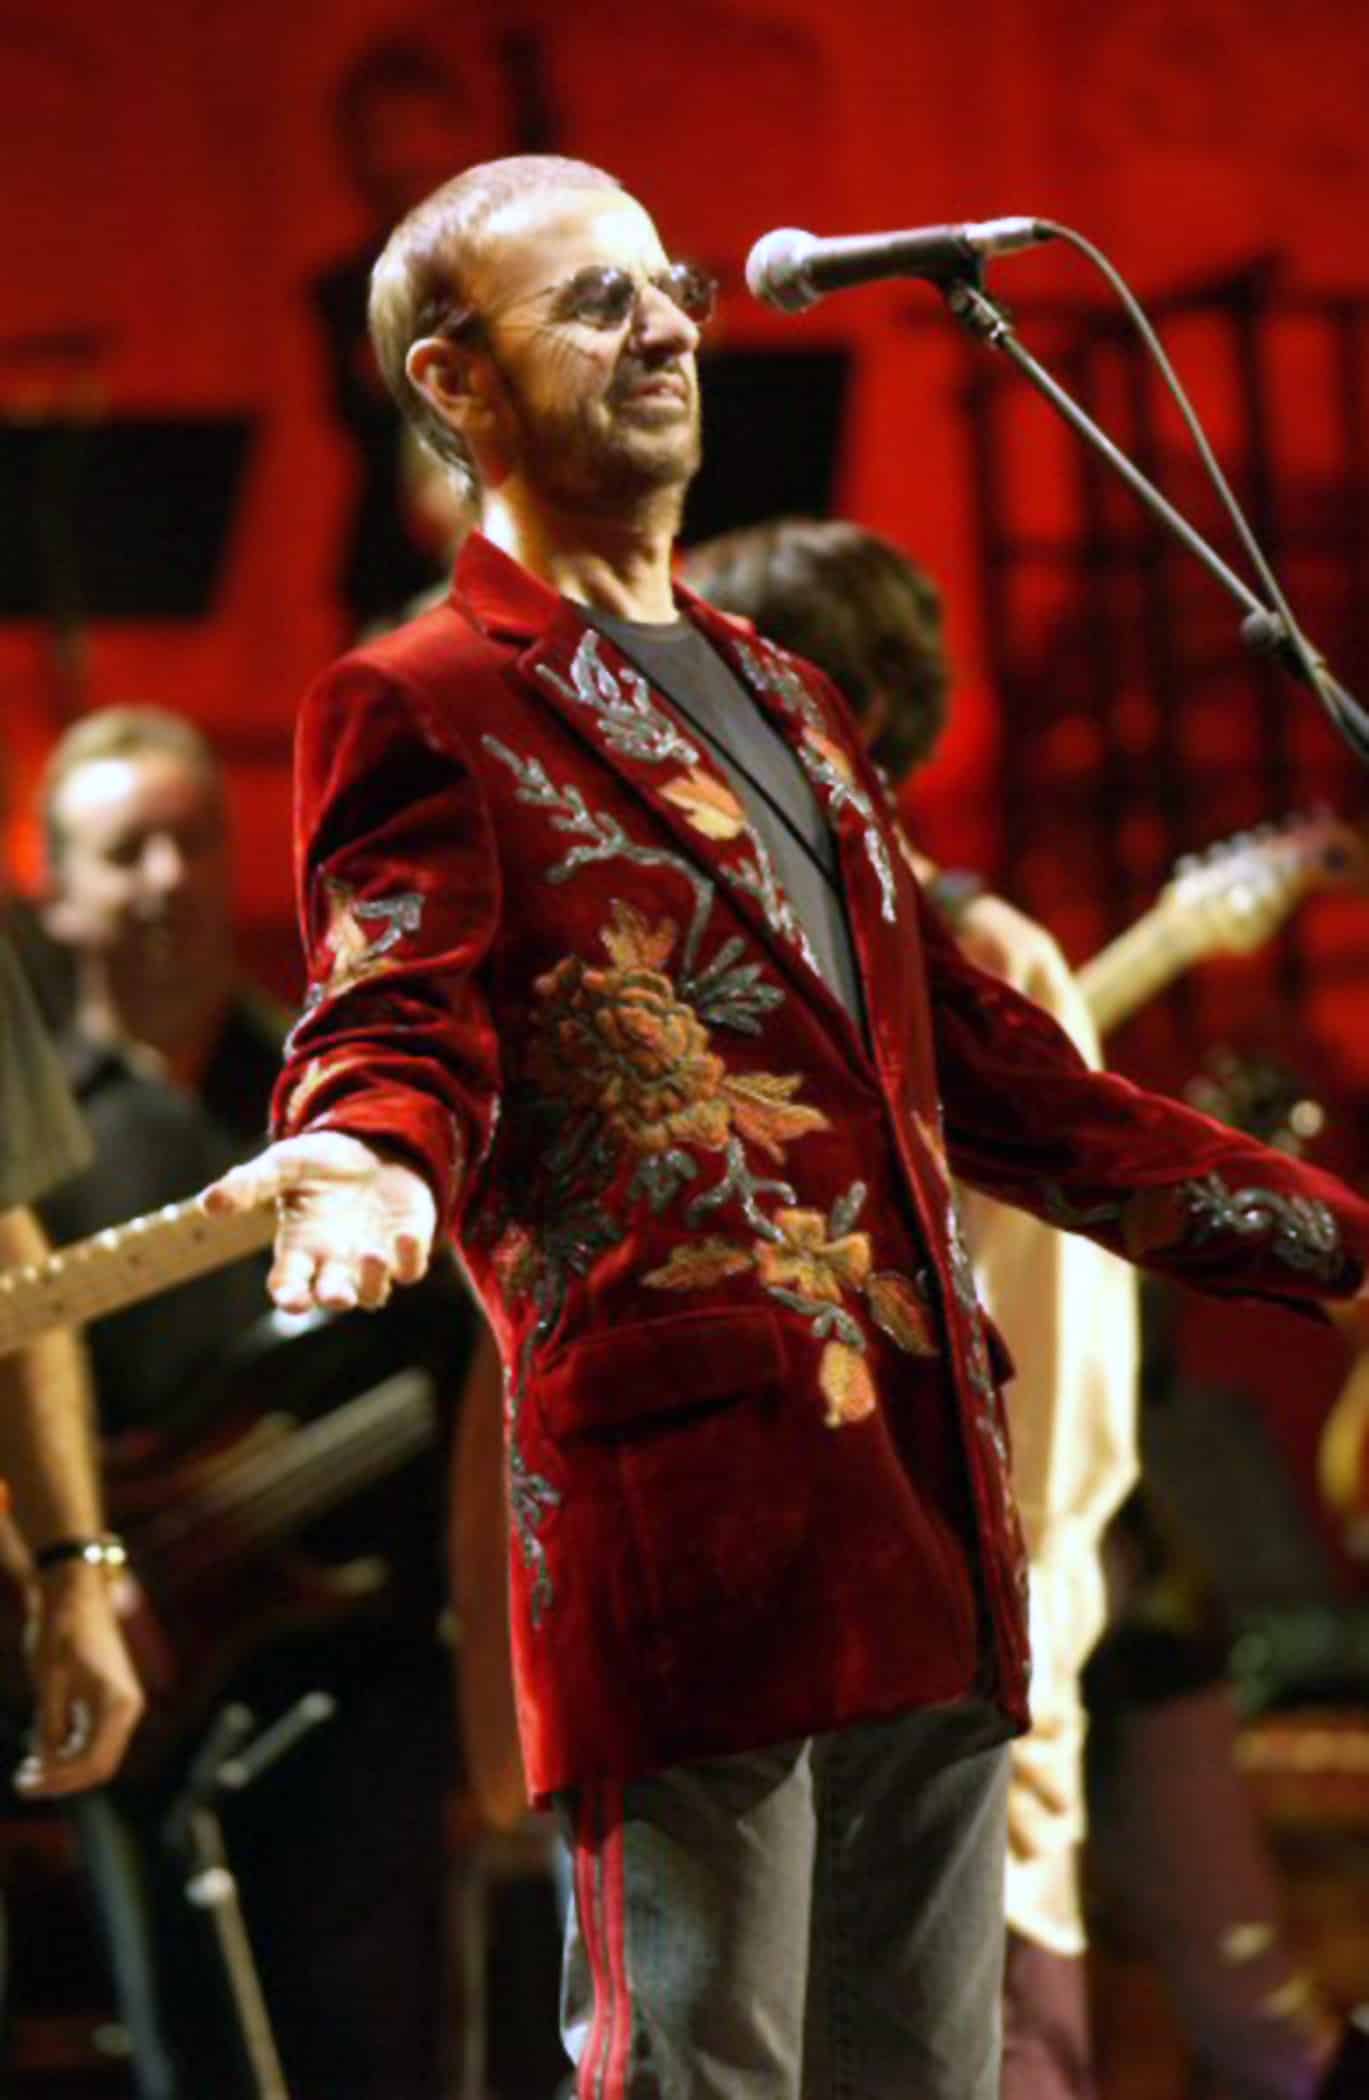 CONCERT FOR GEORGE, Ringo Starr, 2003